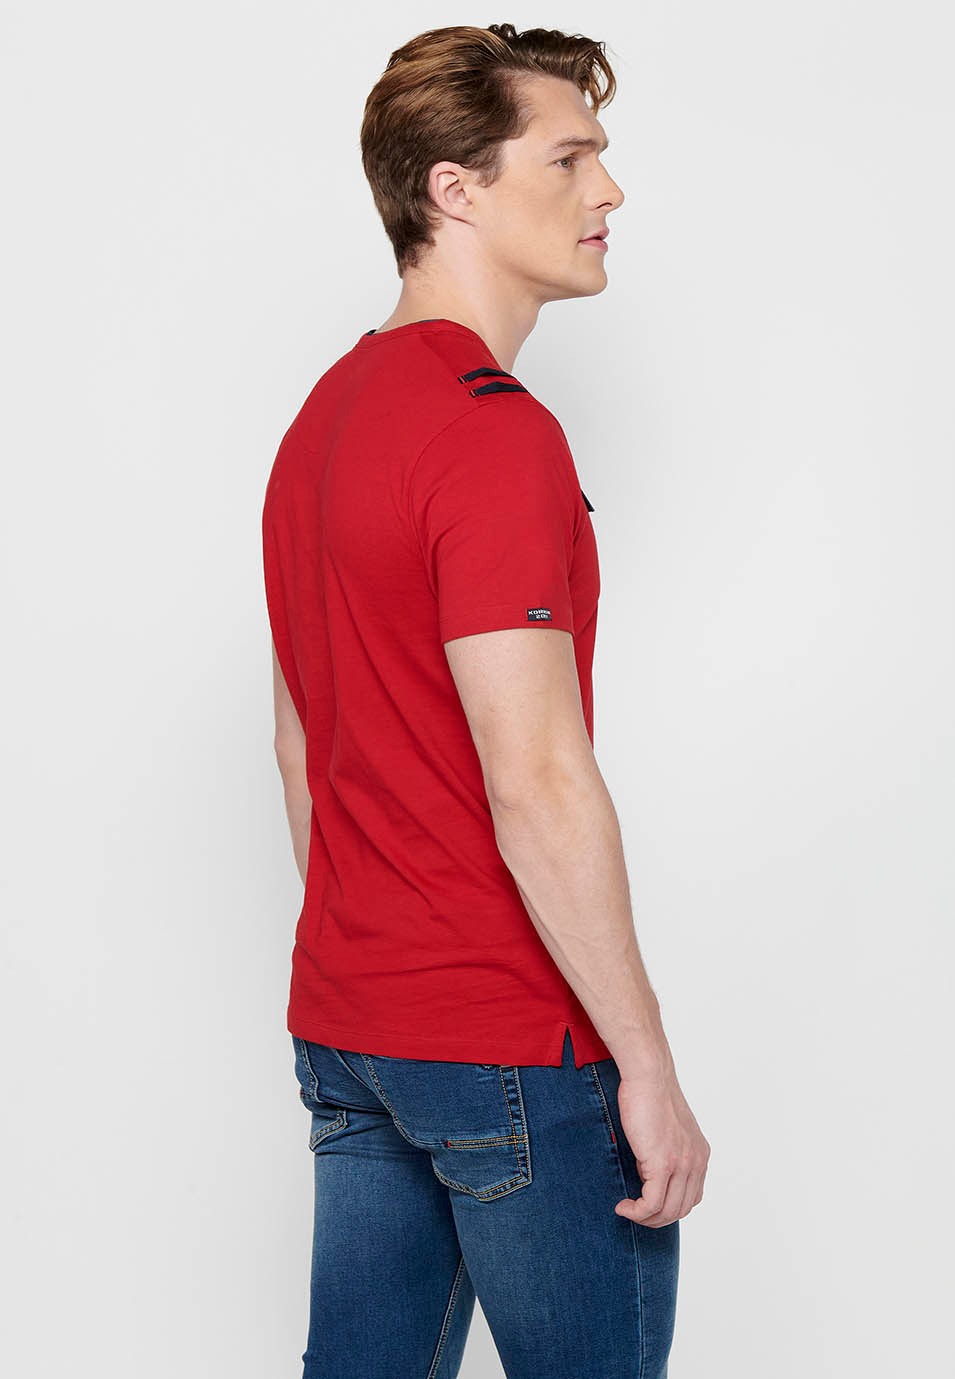 Short Sleeve Cotton T-shirt with Round Neck with Buttoned Opening in Red for Men 4